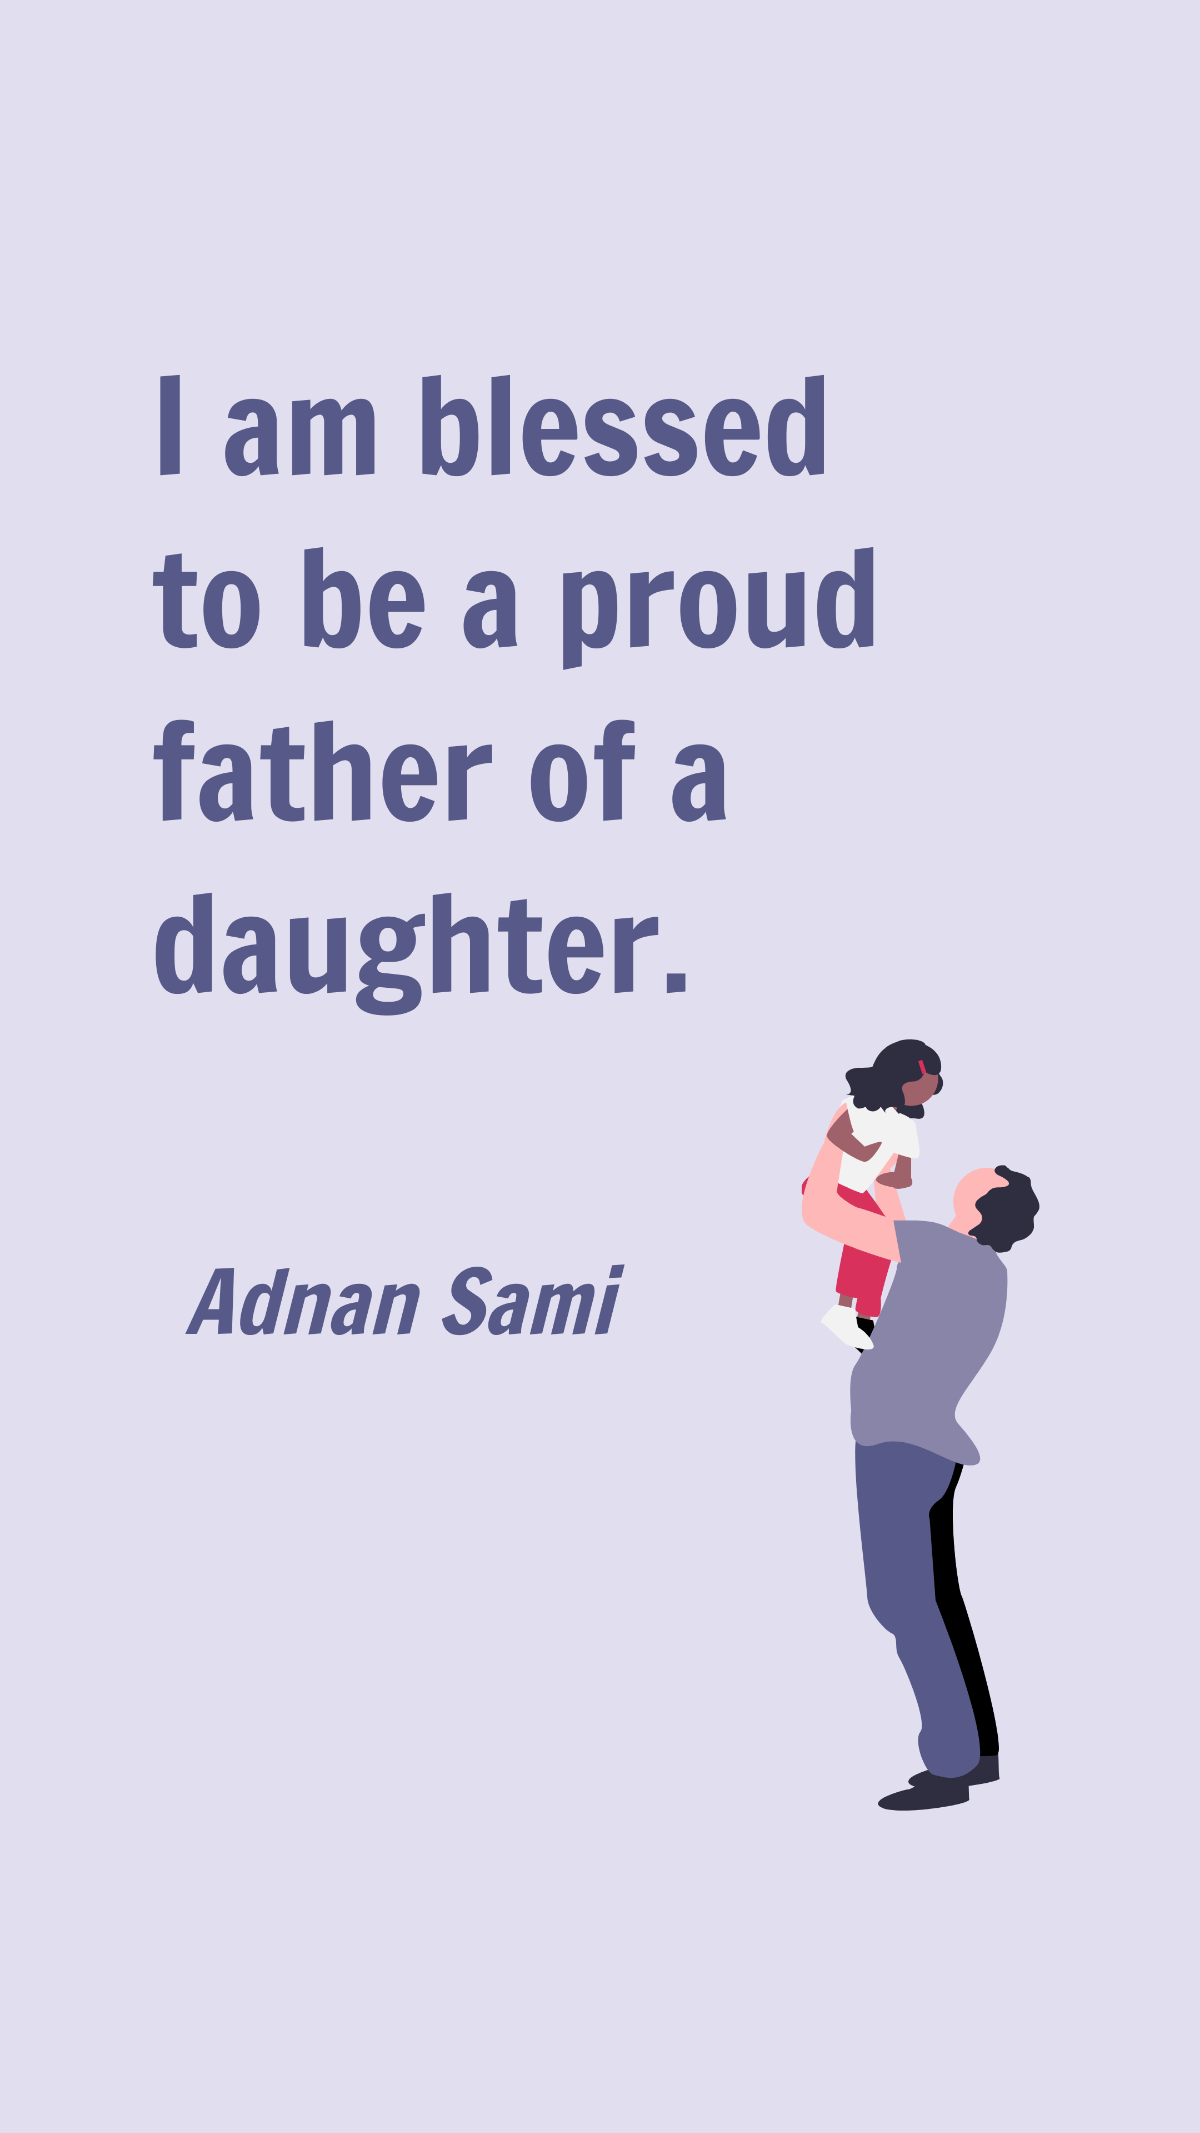 Free Adnan Sami - I am blessed to be a proud father of a daughter. Template